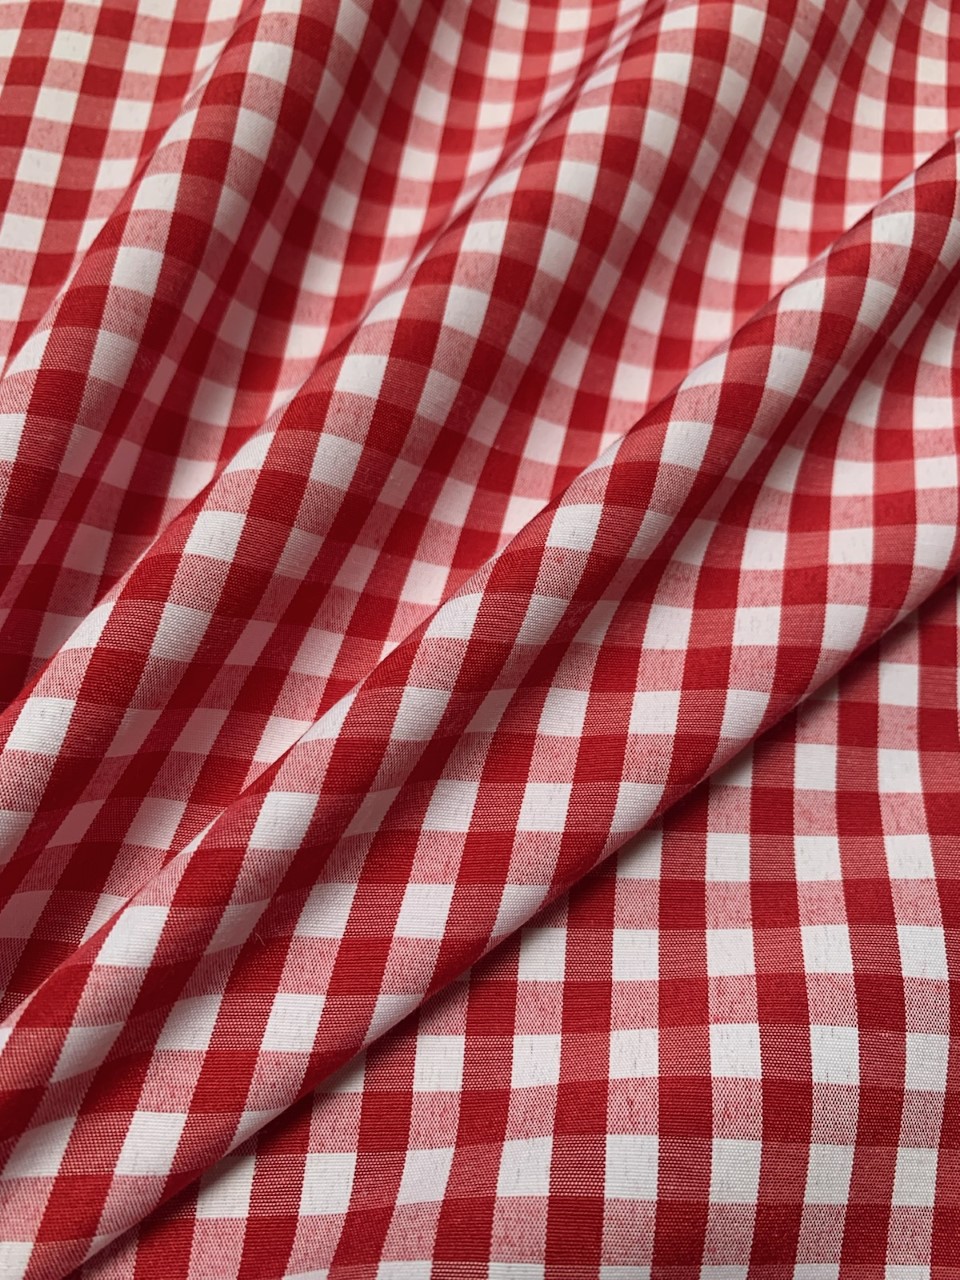 1/4" Red Gingham Fabric 60" Wide By The Yard Poly Cotton Blend